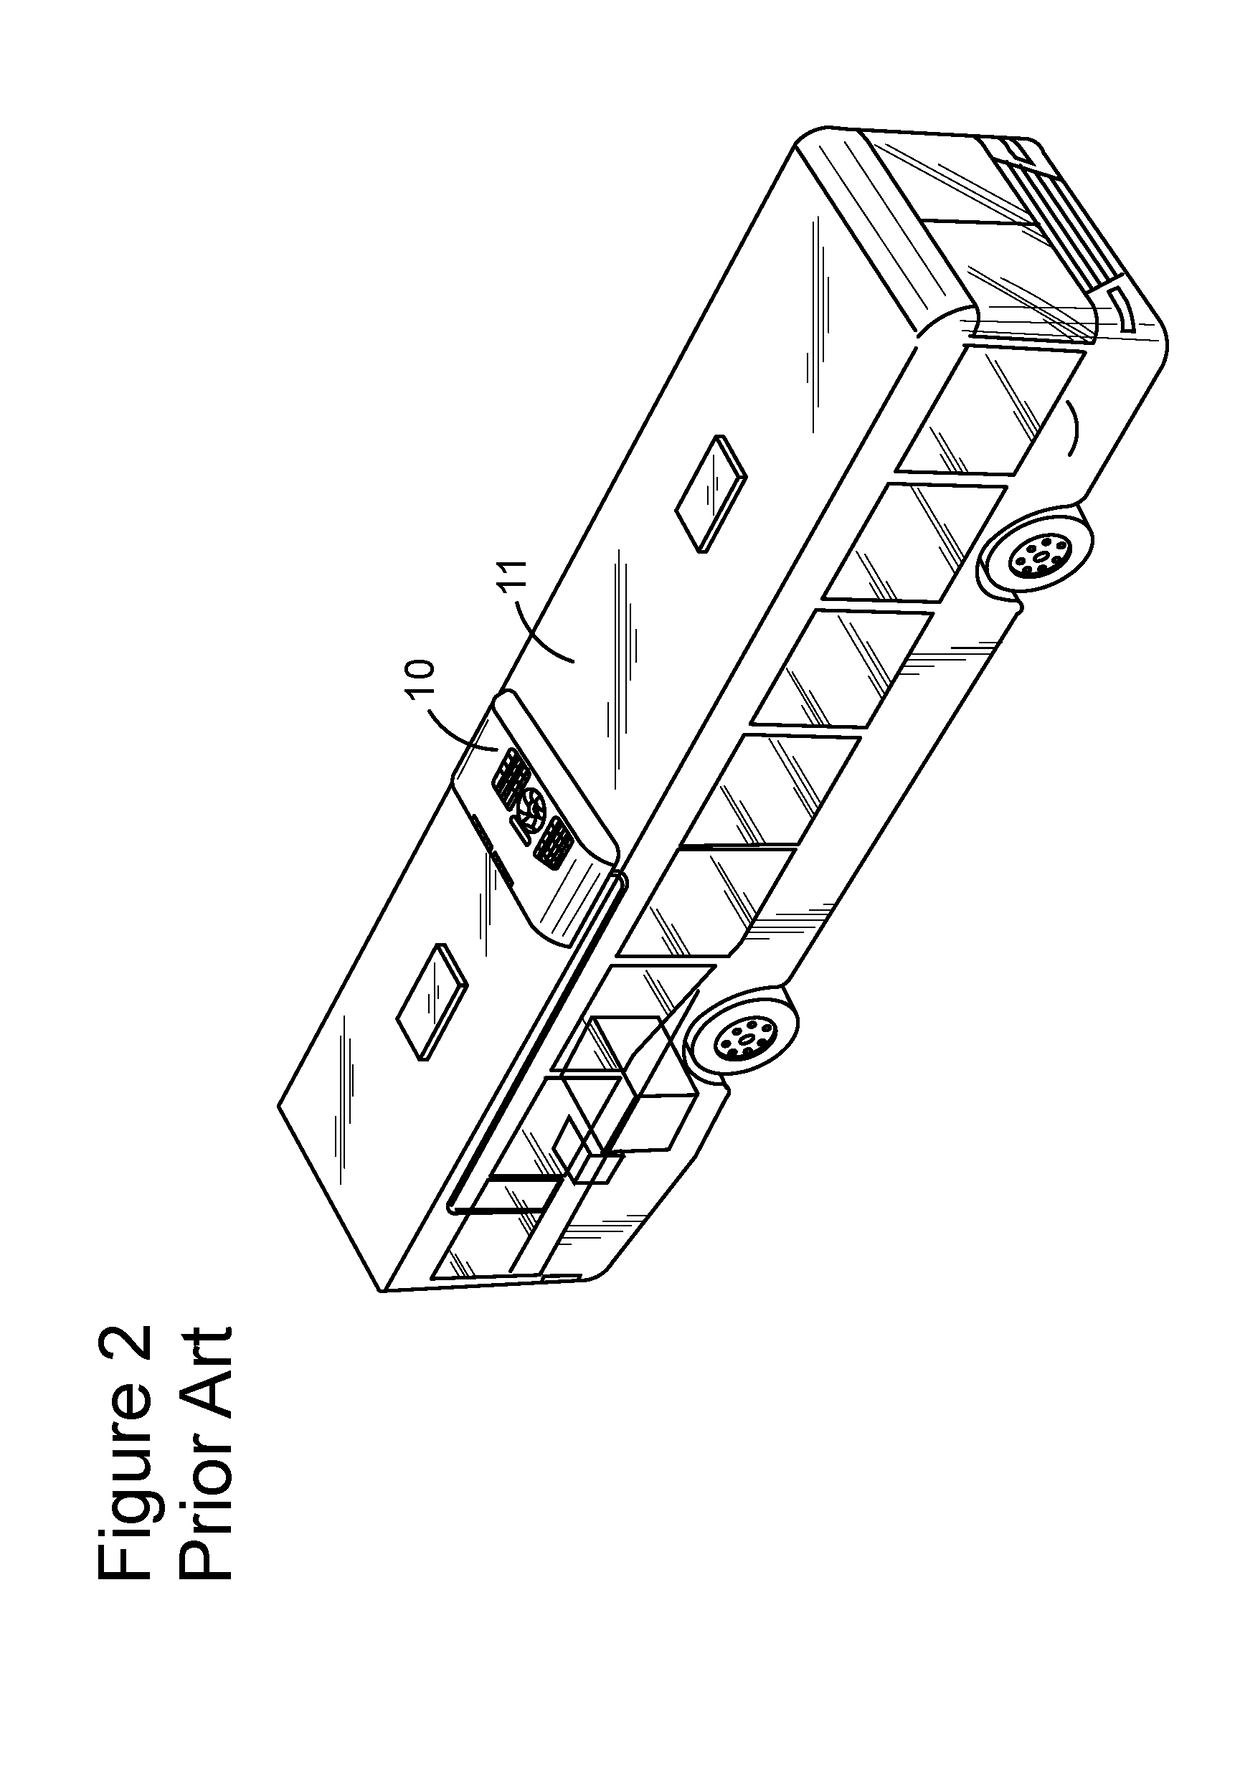 Ionization air purification system for the passenger cabin of a vehicle